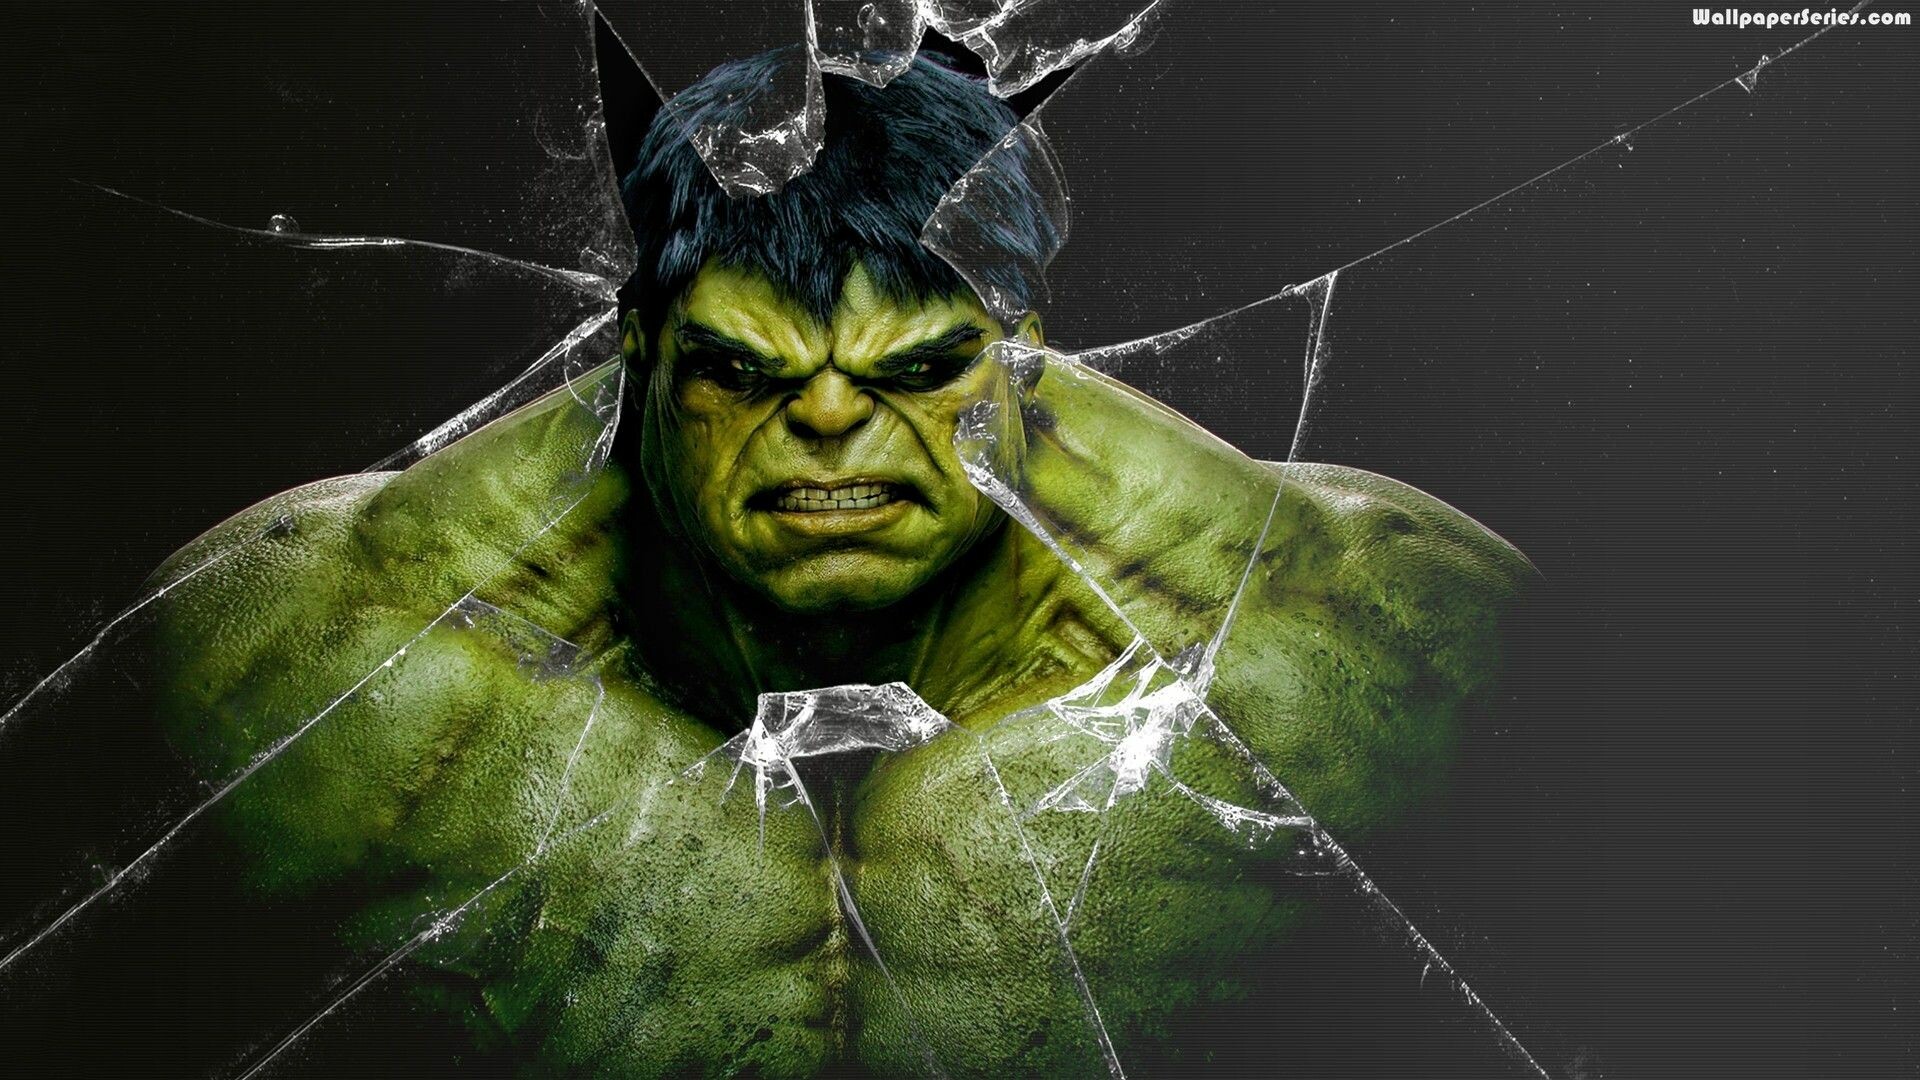 The incredible hulk Wallpapers Download  MobCup